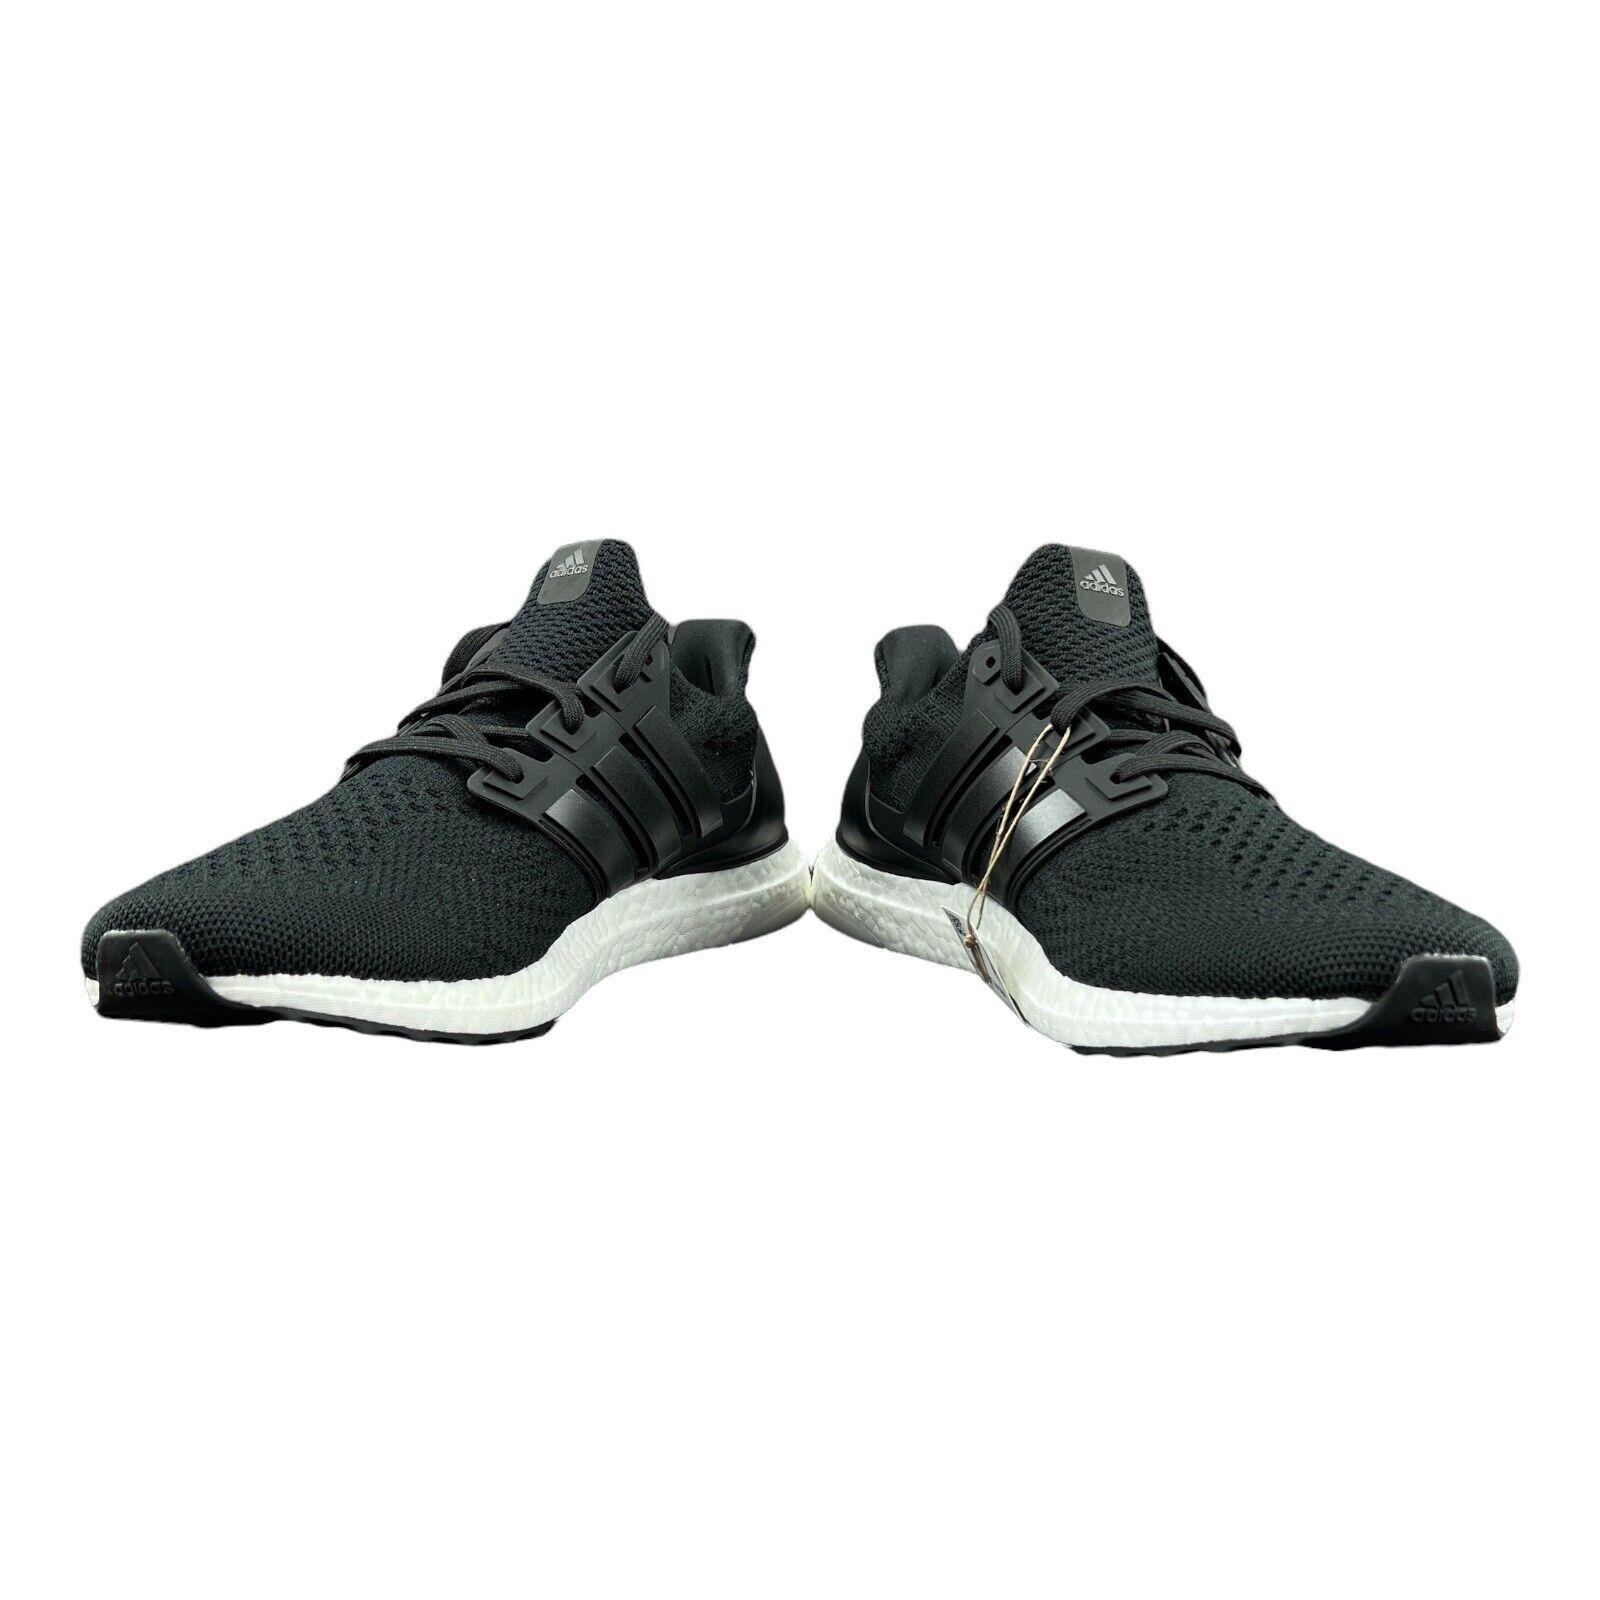 Adidas shoes UltraBoost DNA - Black 5